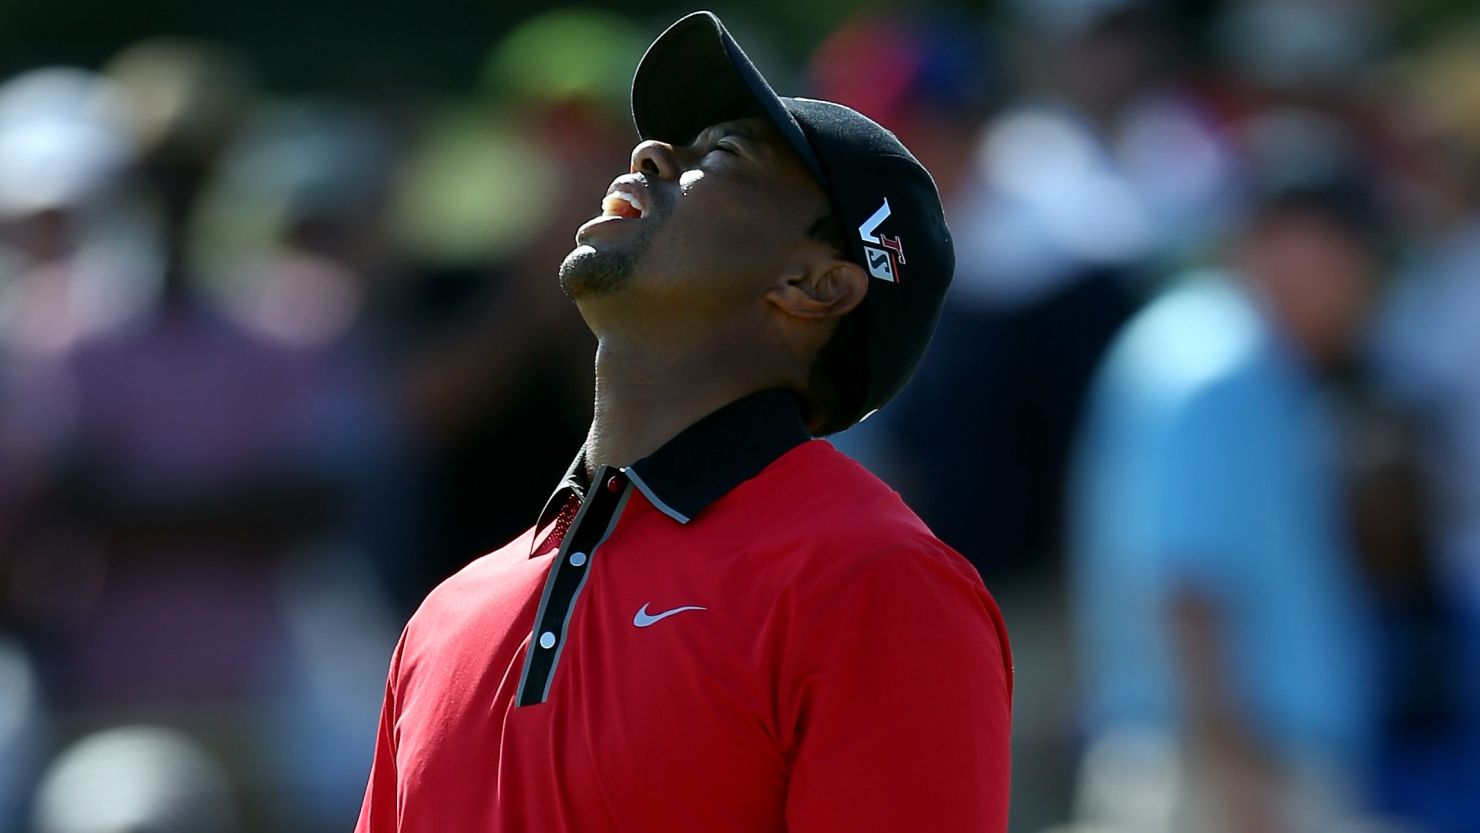 Tiger Woods' 2K Video Game Deal Helps Tee Up A Lucrative